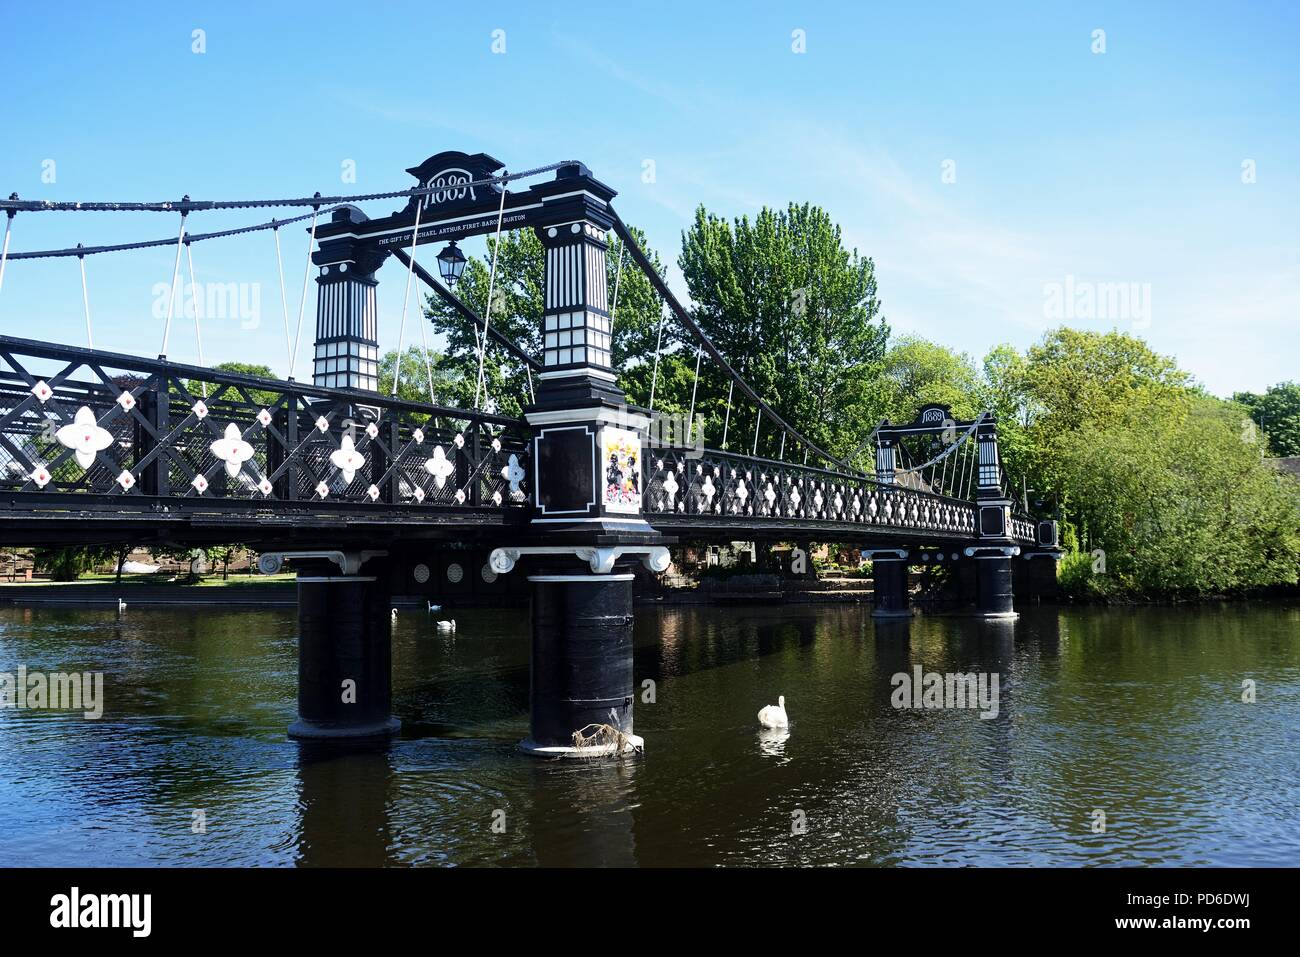 View of the Ferry Bridge also known as the Stapenhill Ferry Bridge and the  River Trent, Burton upon Trent, Staffordshire, England, UK, Western Europe  Stock Photo - Alamy